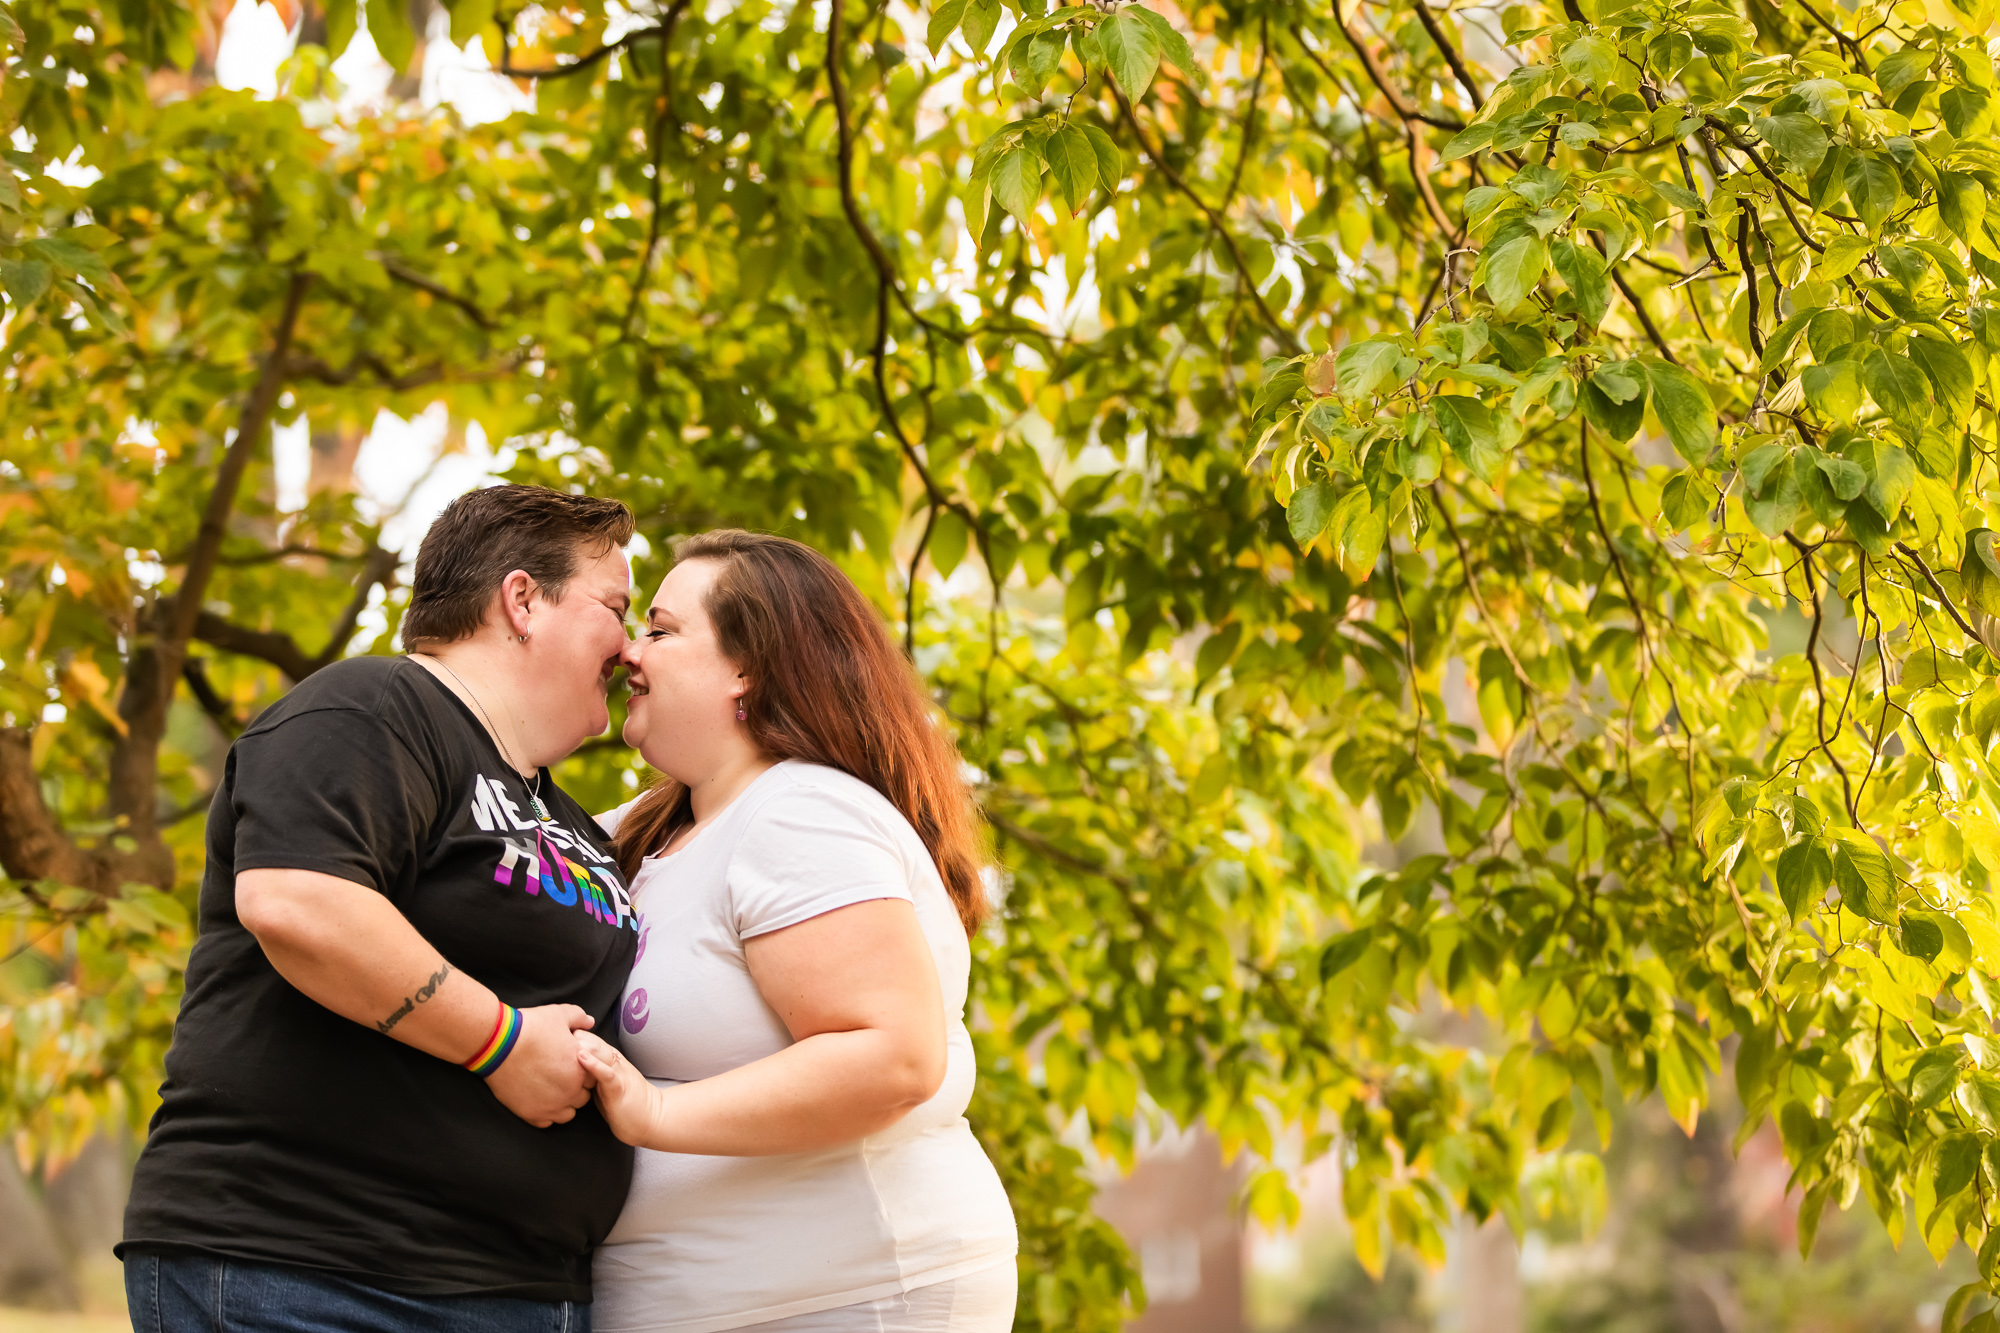 Lesbian couple holding hands and kissing beneath a tree.